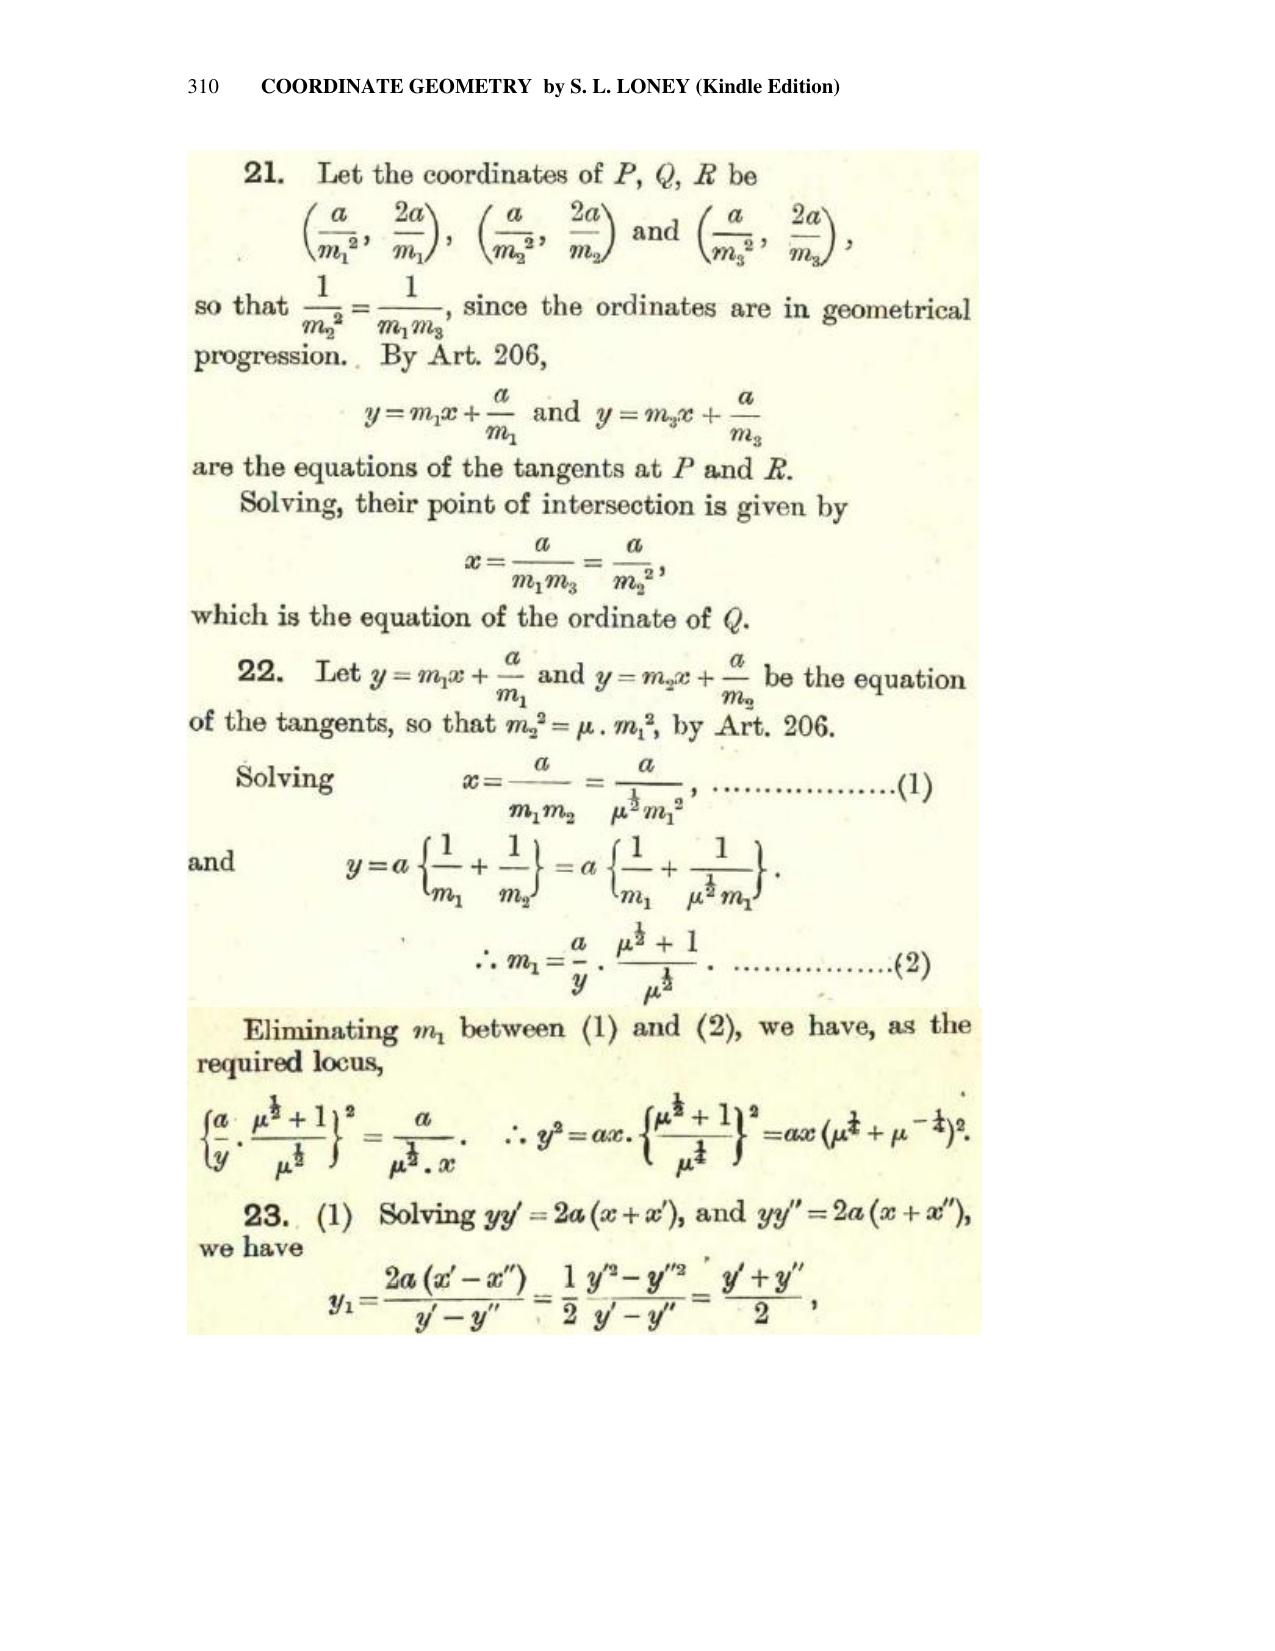 Chapter 10: The Parabola - SL Loney Solutions: The Elements of Coordinate Geometry - Page 24